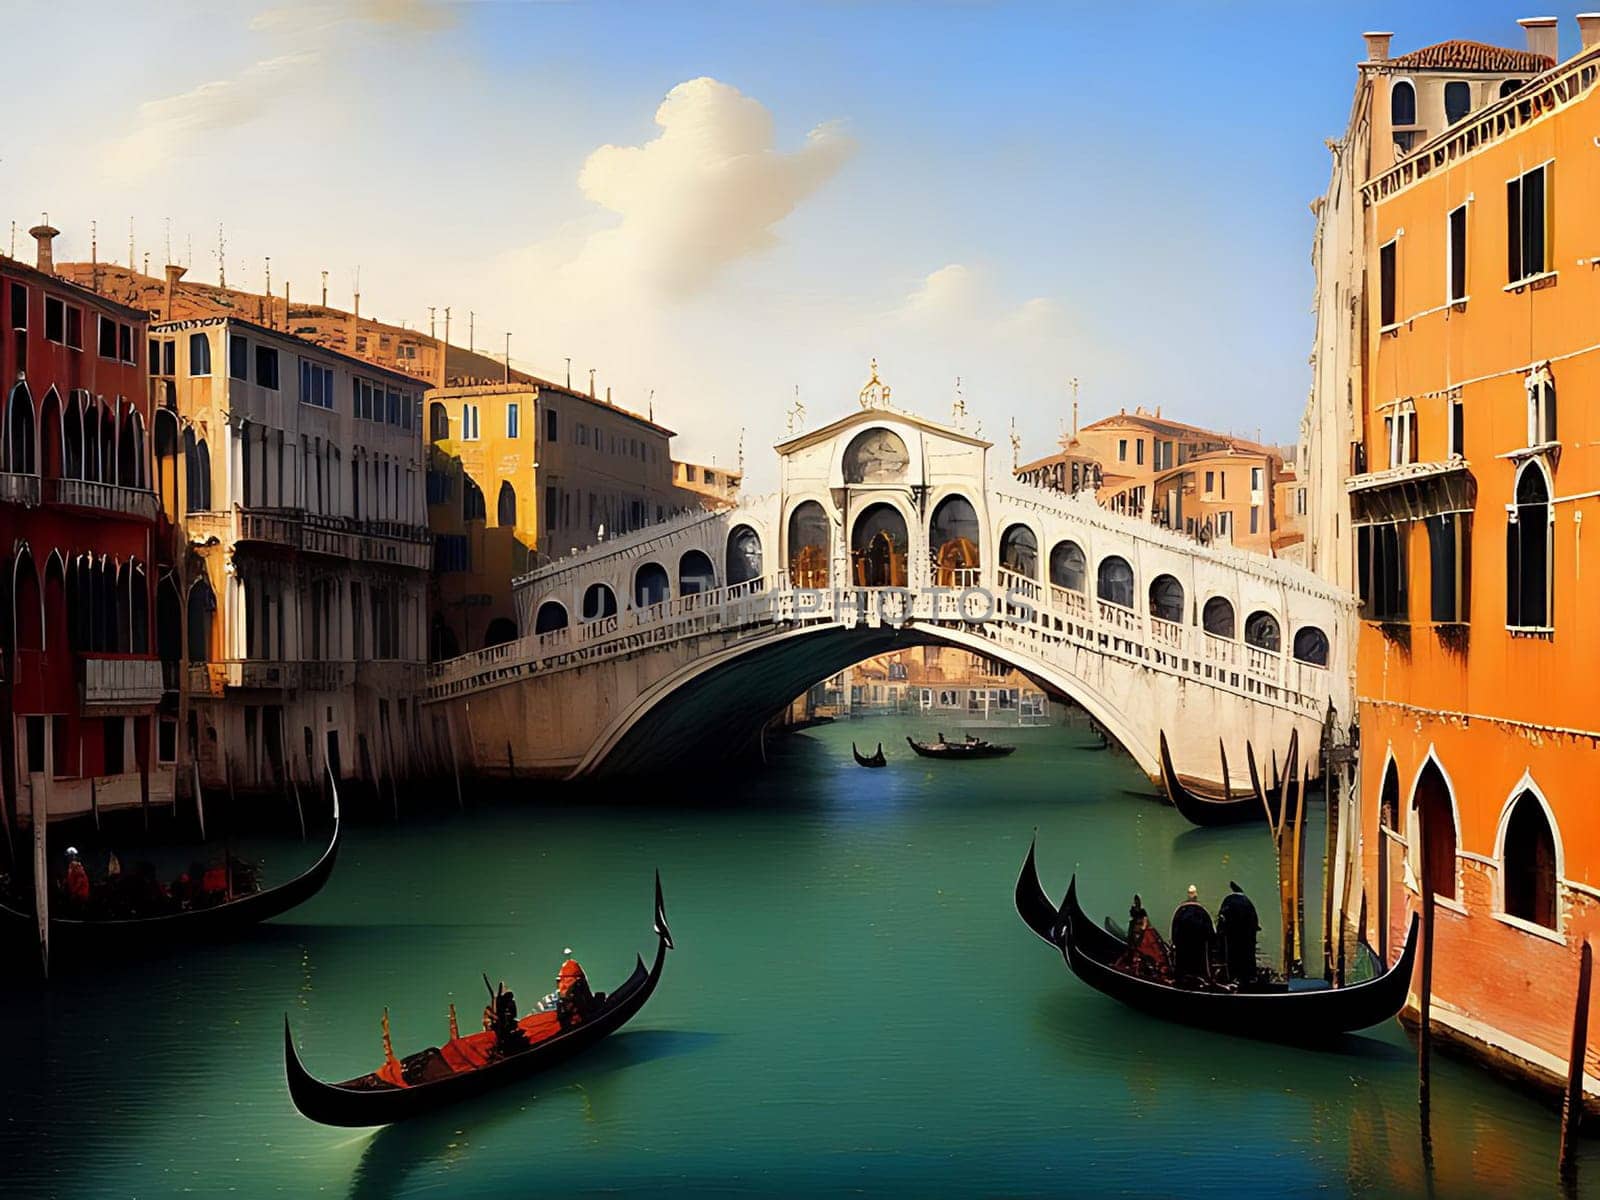 The picturesque Rialto Bridge gracefully spans the Grand Canal, while charming gondolas float serenely in the foreground, creating an iconic scene in Venice, Italy. The tranquil waters reflect the beauty of the bridge, adding to the enchantment of the city's romantic atmosphere. AI generated.